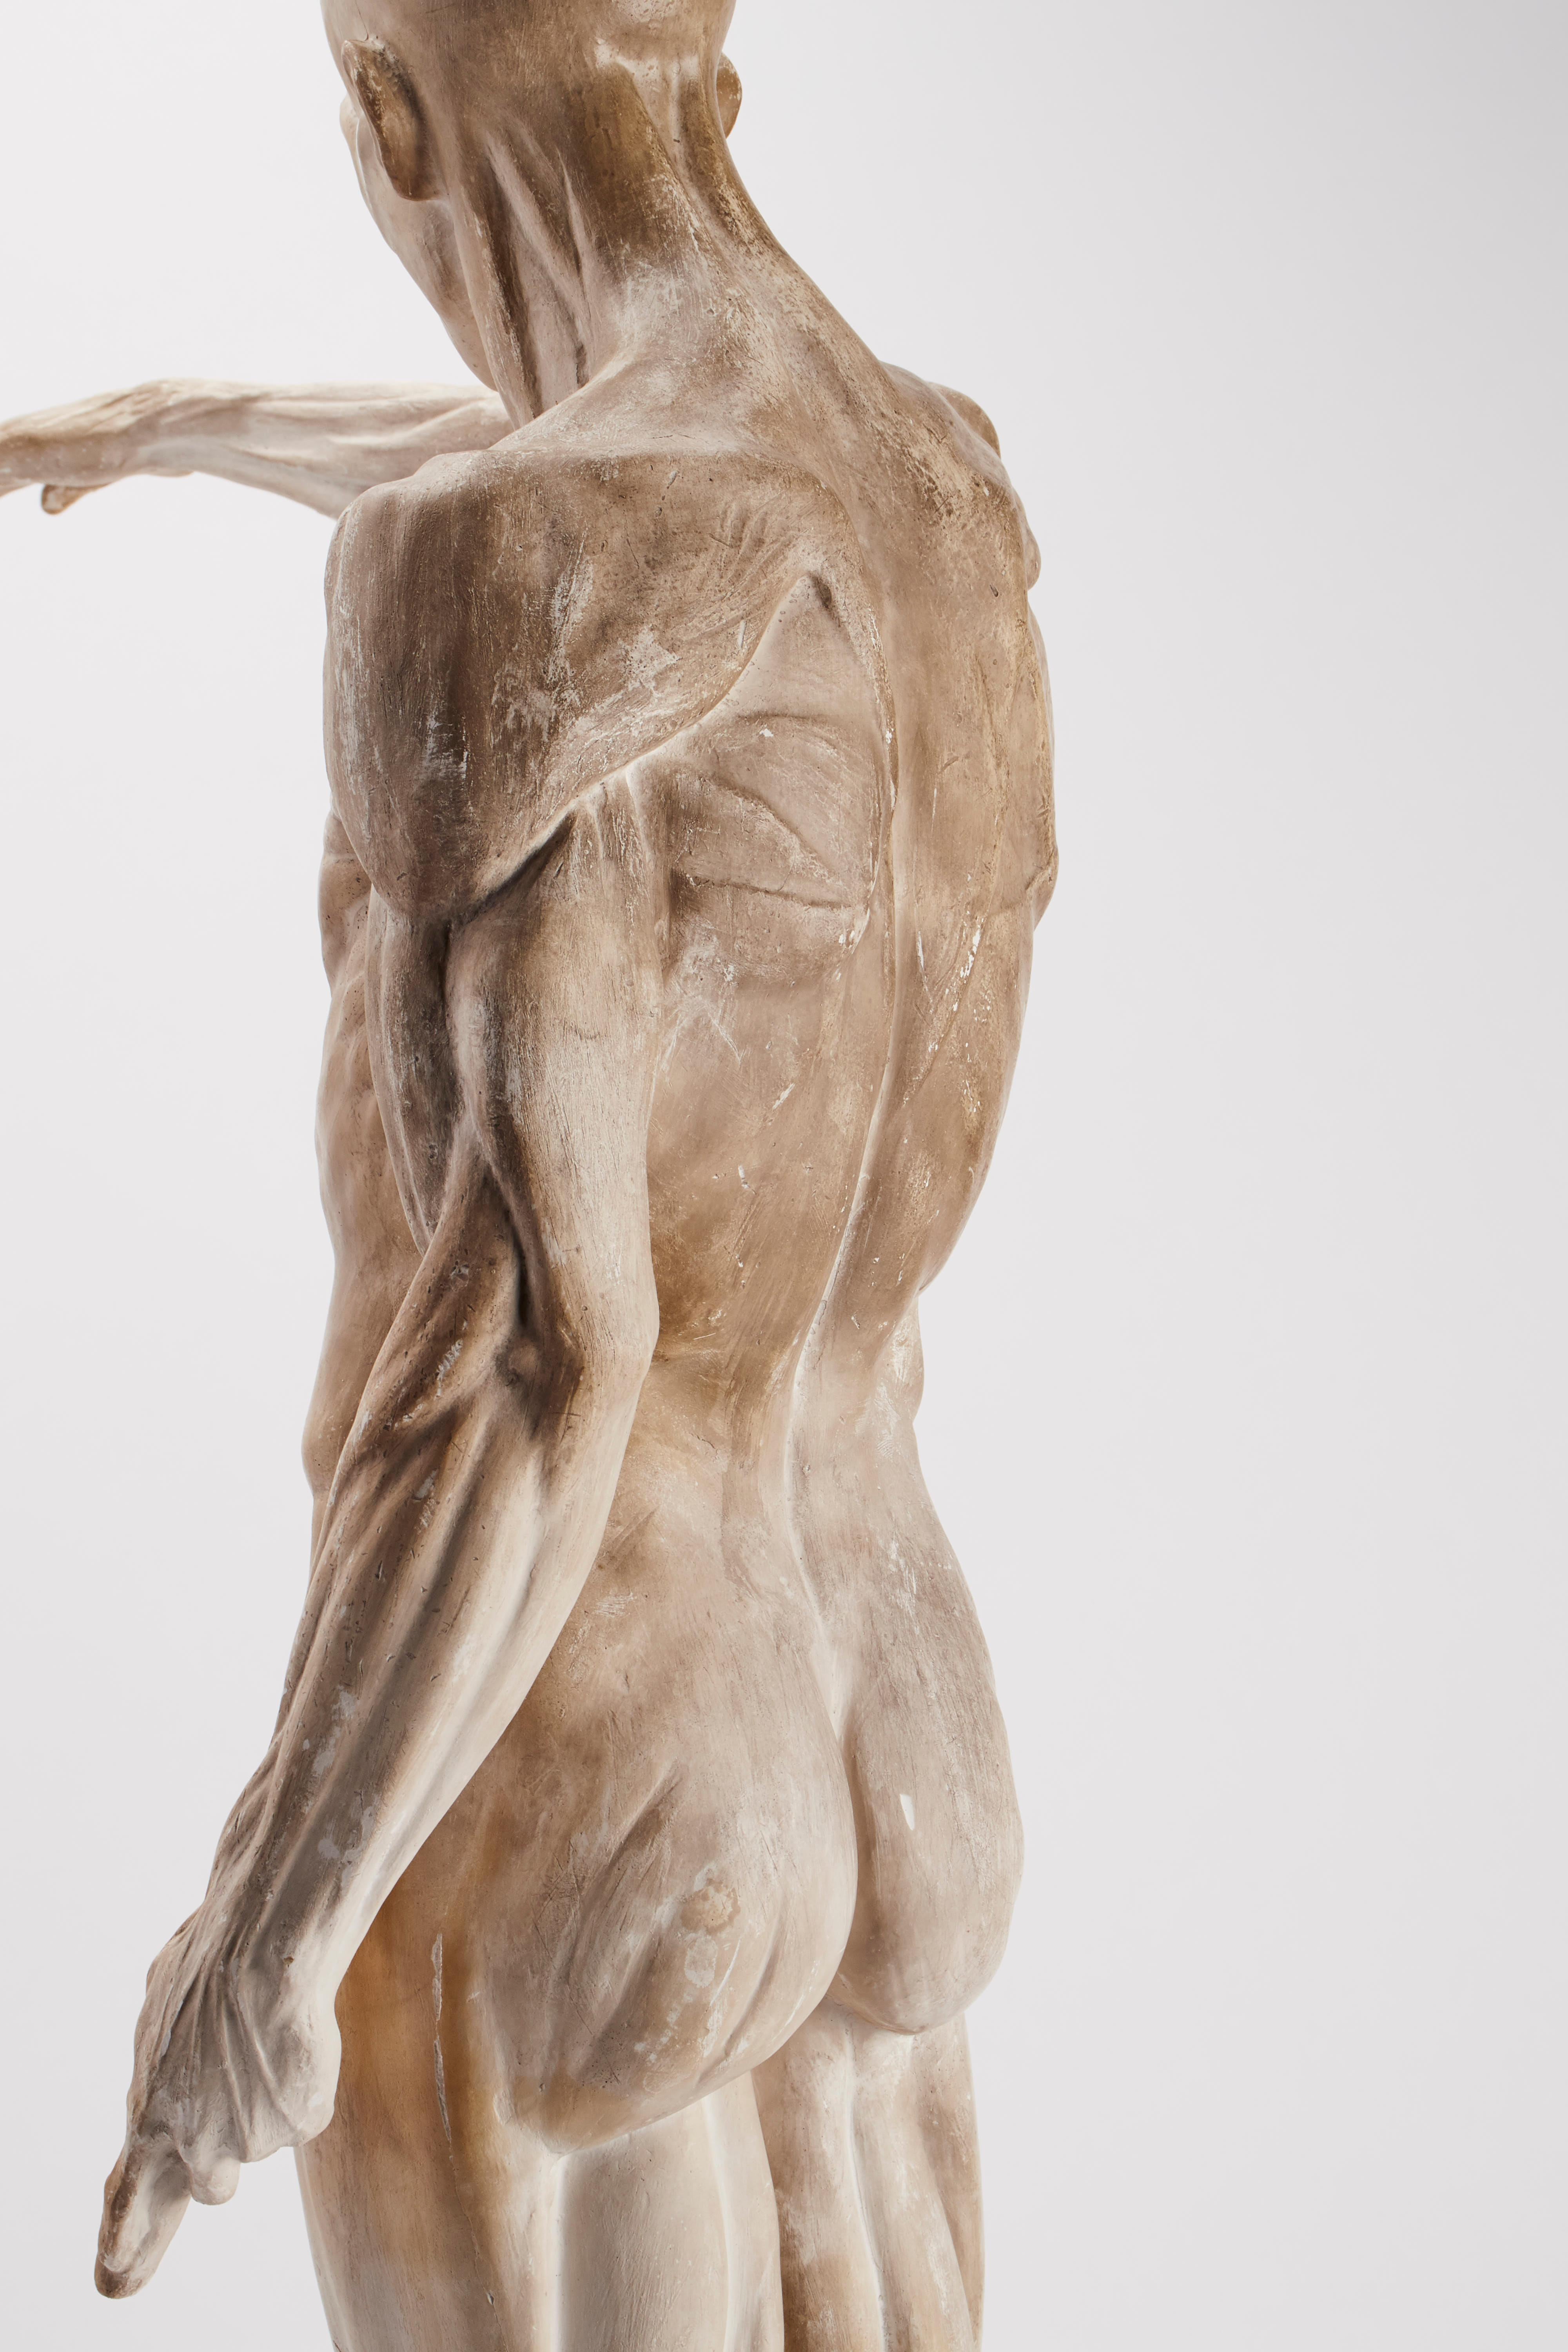 Plaster Anatomical Model, Italy, 1880